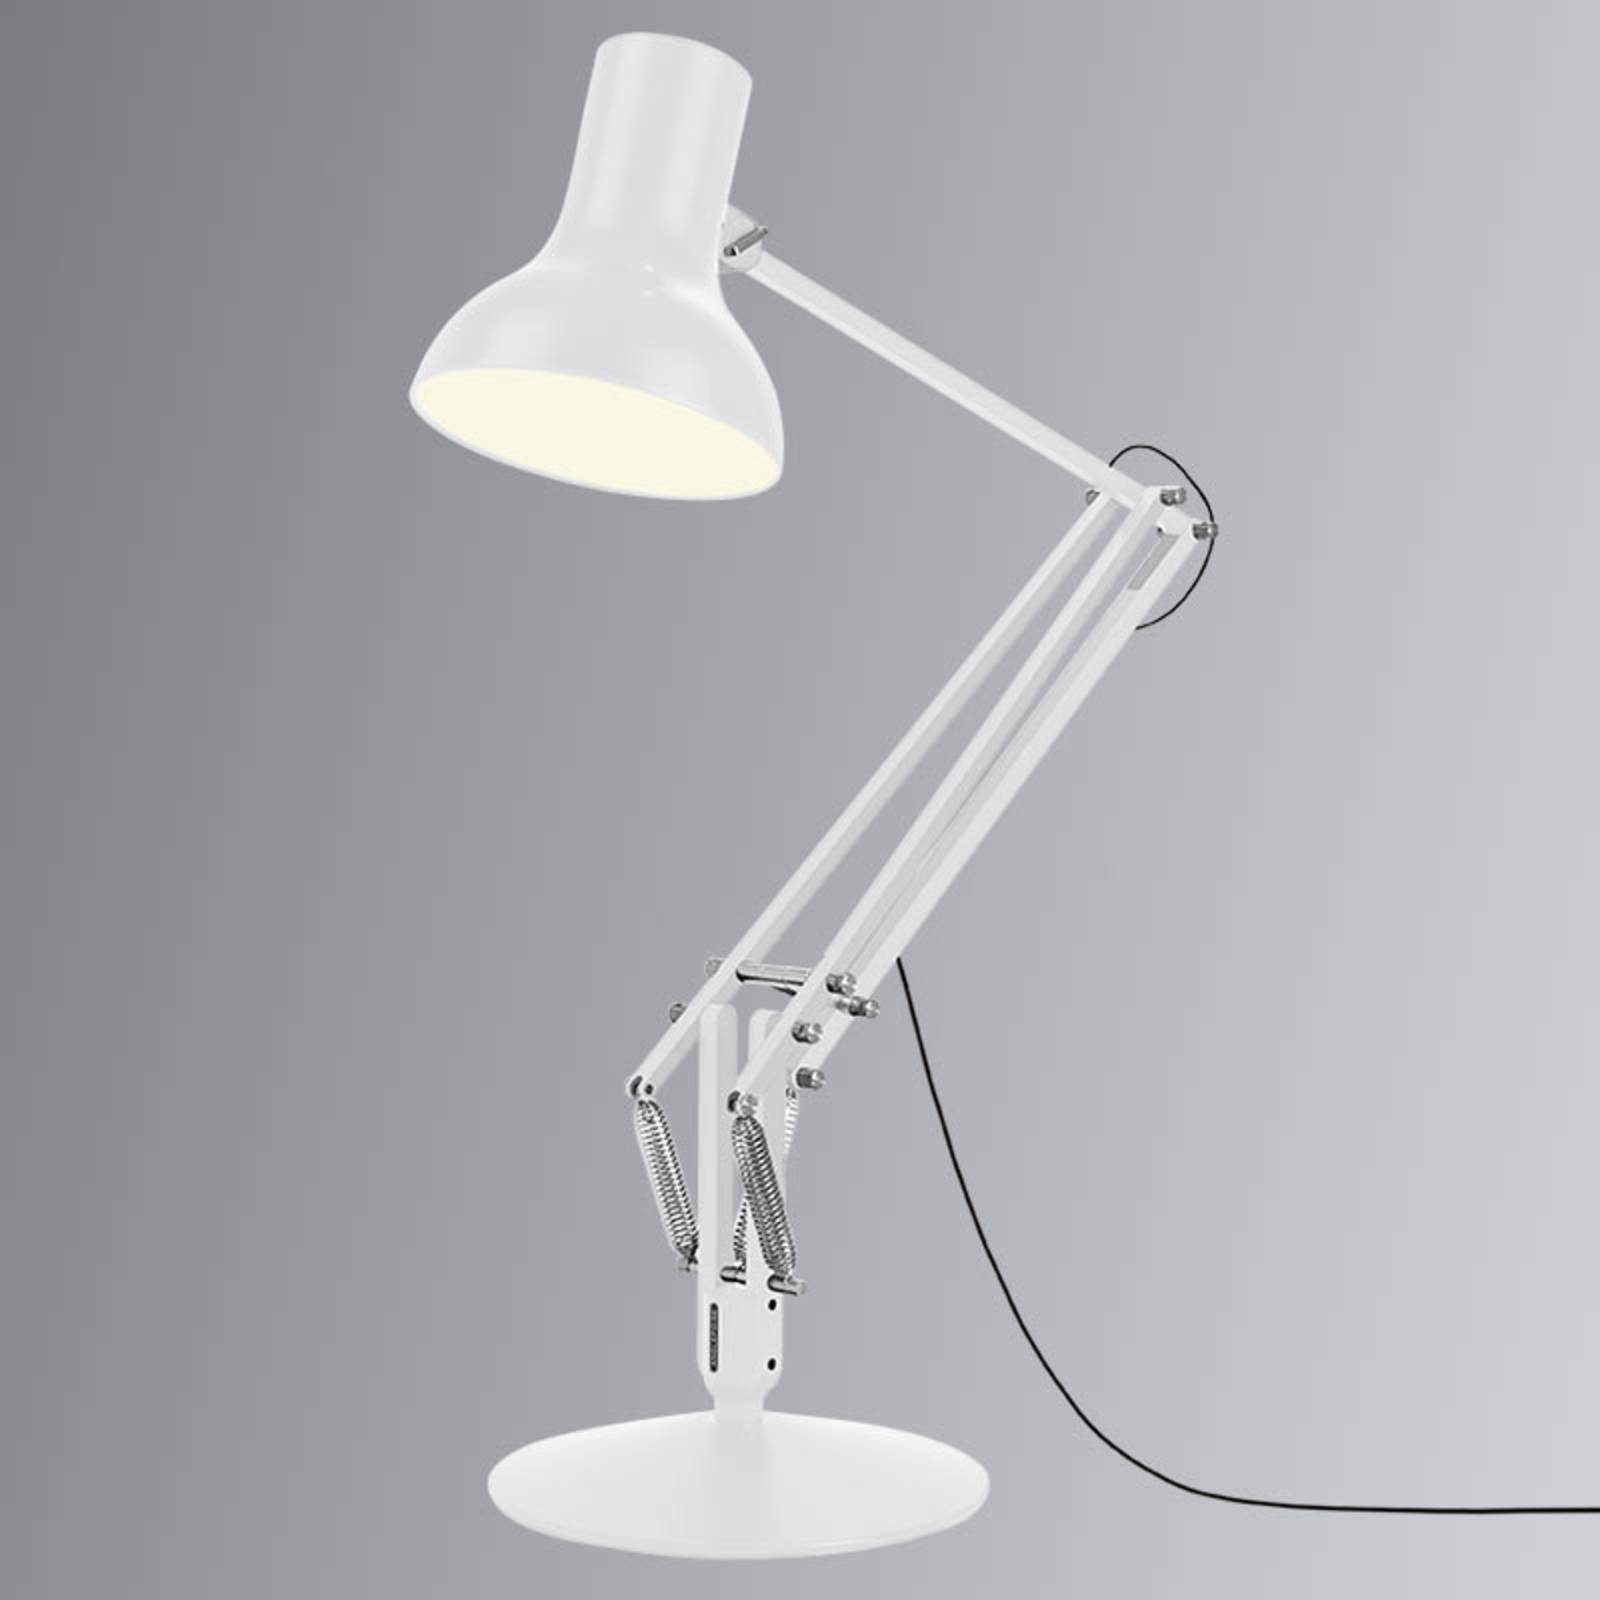 Anglepoise Type 75 Giant lampadaire blanc